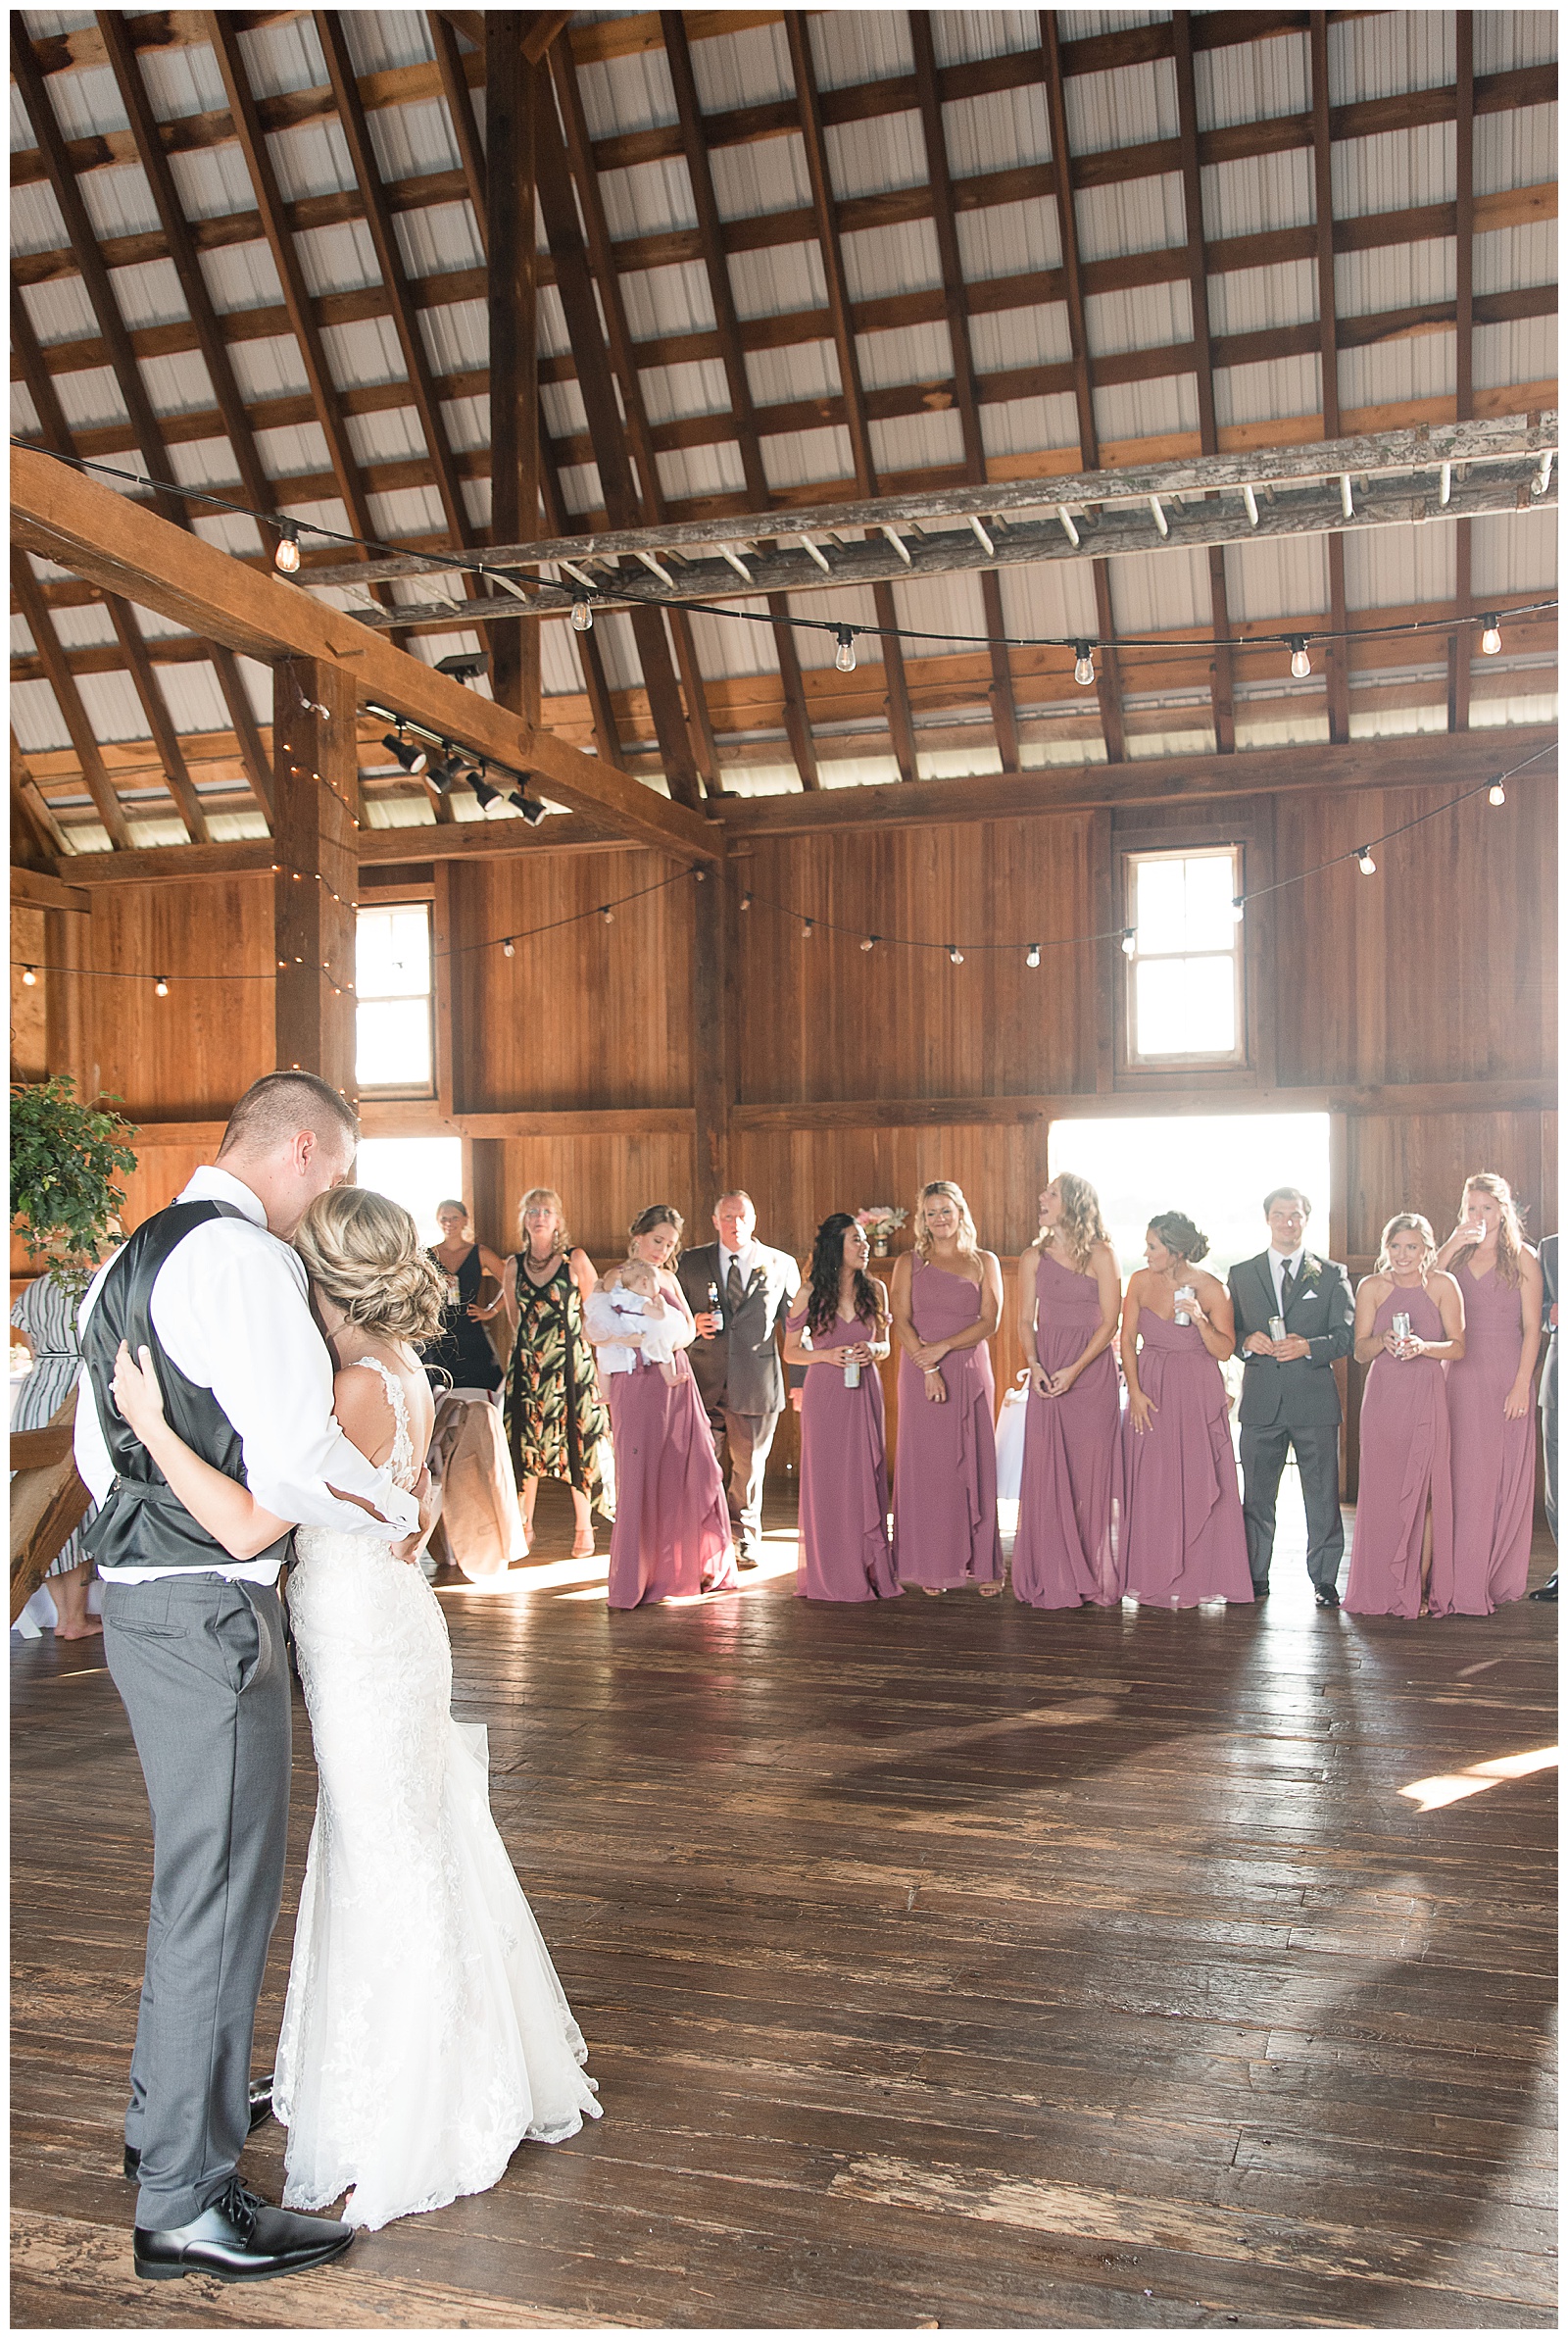 the groom is on the left and the bride on the right and they are hugging one another and slow dancing with their backs to the camera on the left side of the photo with their bridal party lined up further behind them watching in the barn reception area at Lakefield Wedding in Manheim, PA